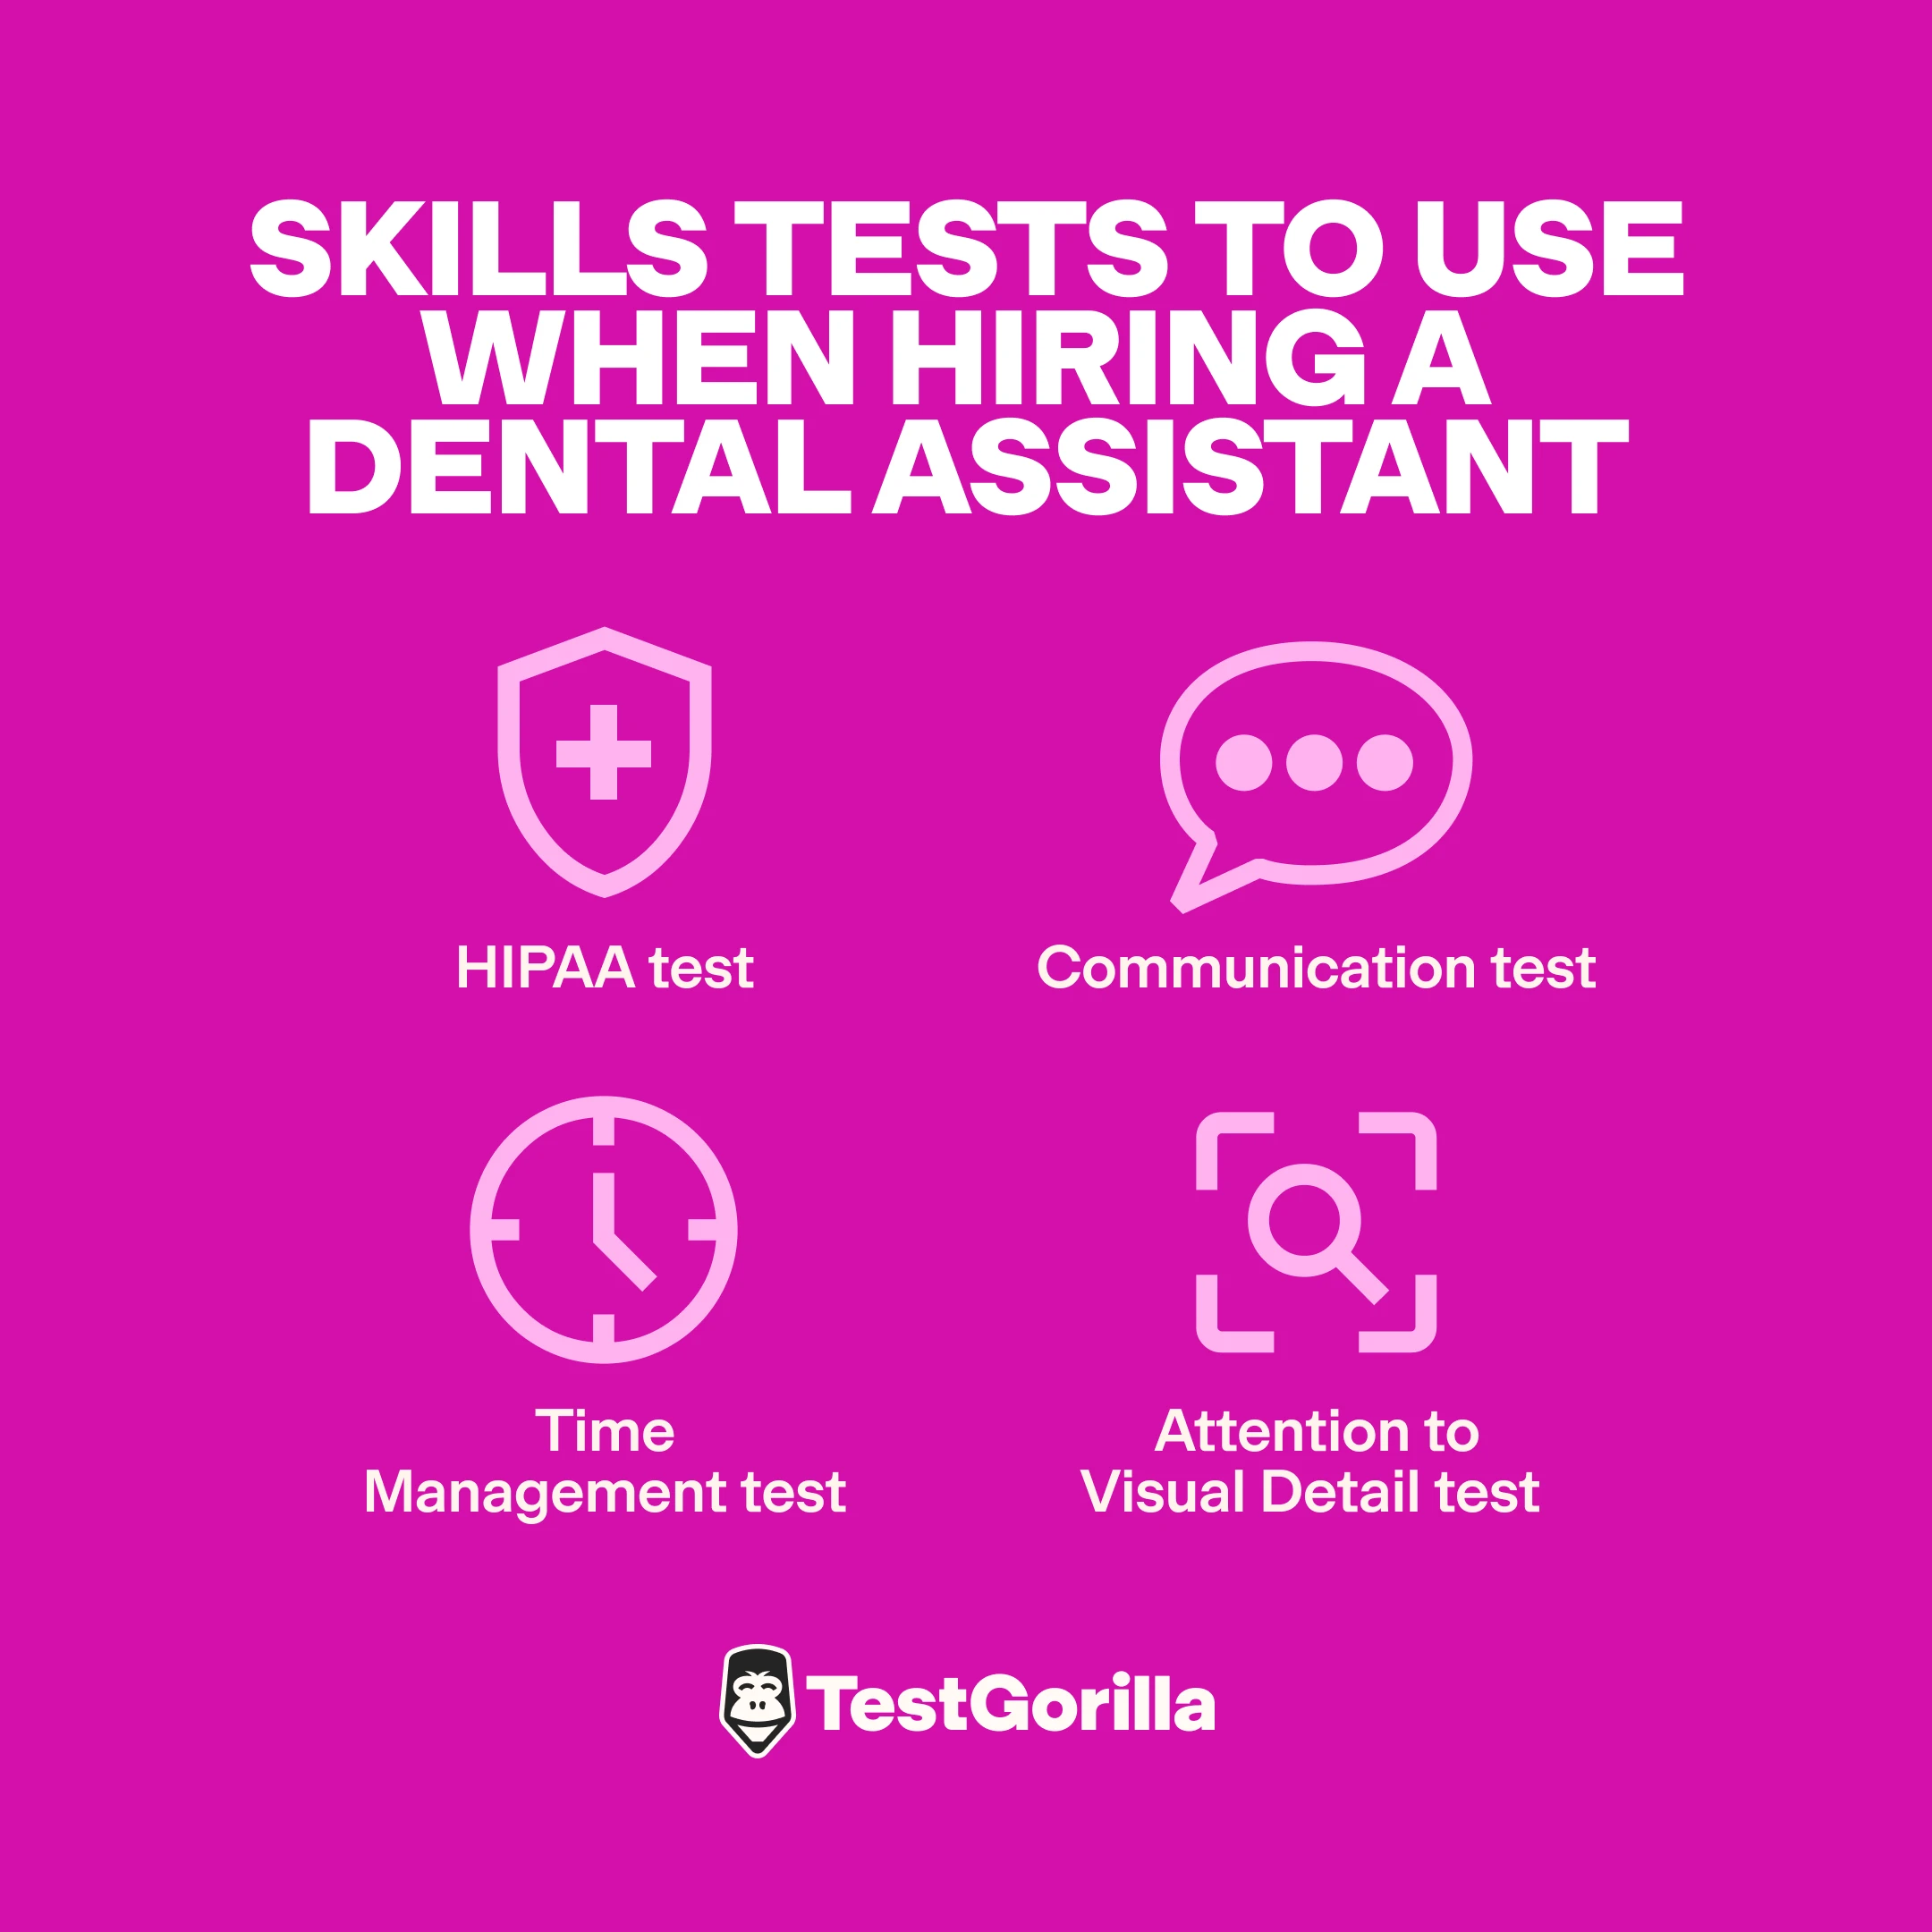 Skills tests to use when hiring a dental assistant